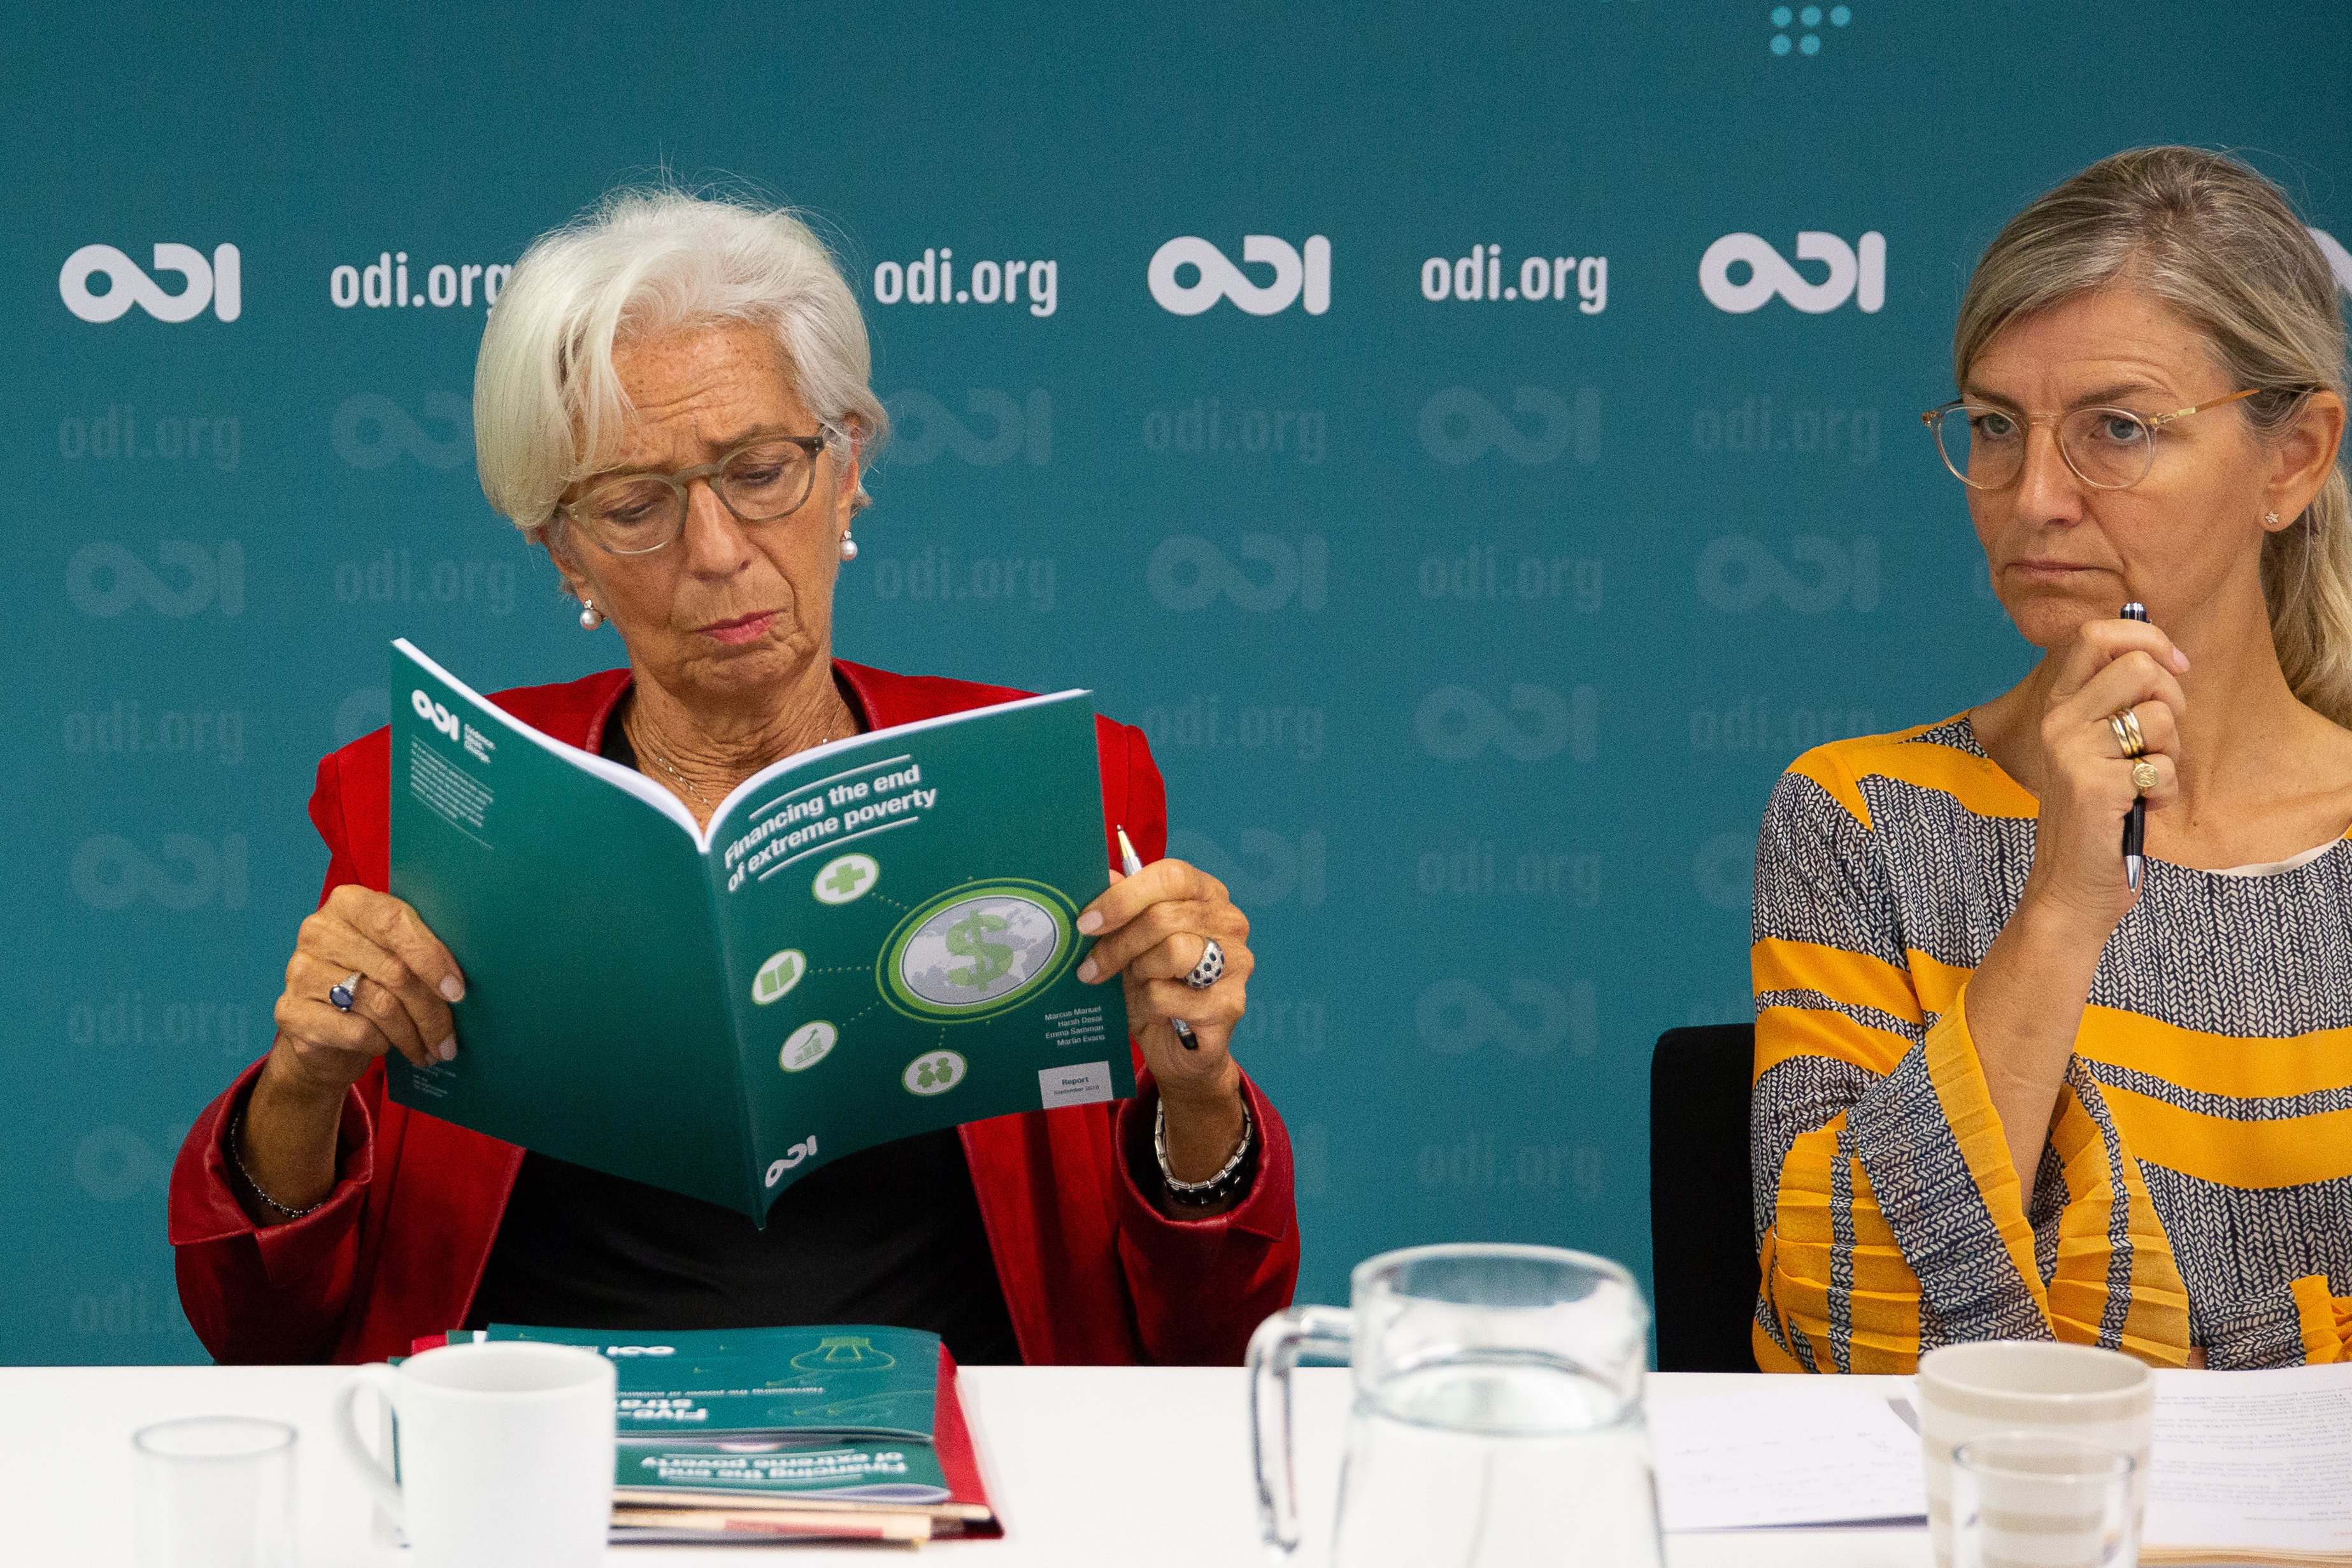 Christine Lagarde, Managing Director of the IMF, reading ODI report at a roundtable event with Ulla Tørnæs, Danish Minister for Development Cooperation